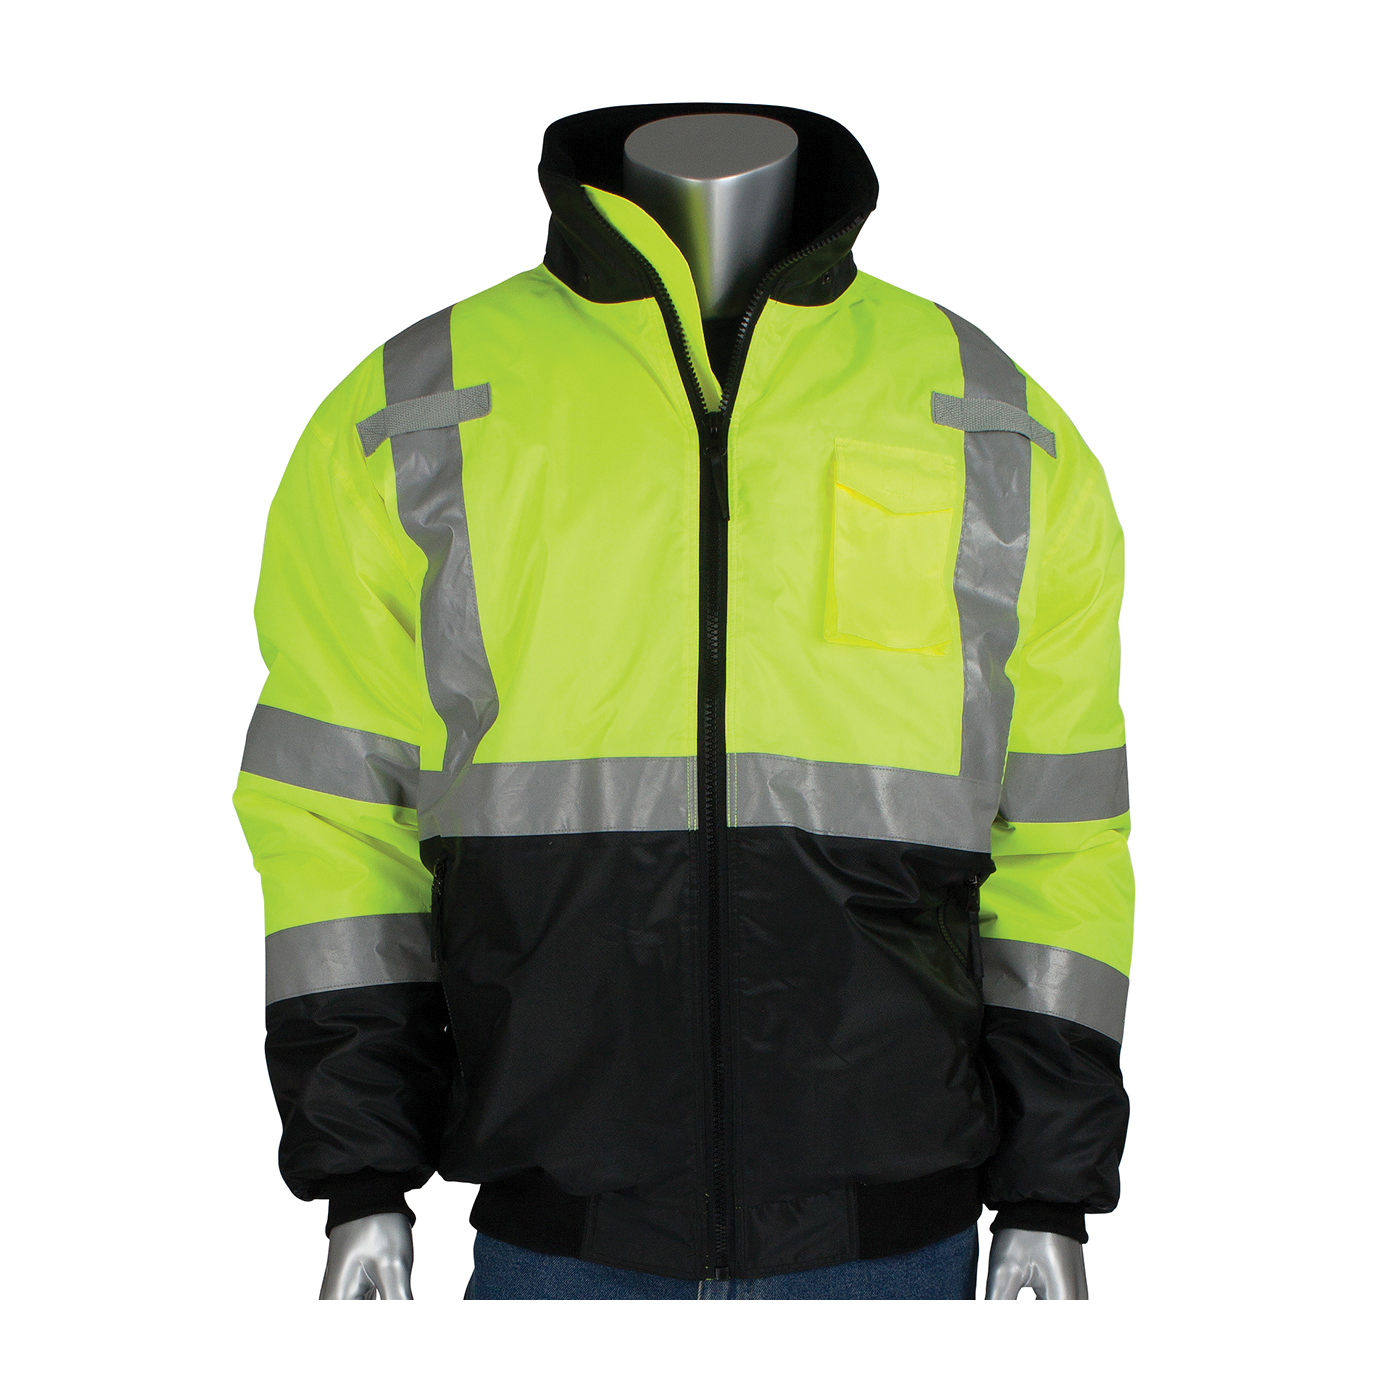 PIP® 333-1740-LY/S Bomber Jacket, Black/Hi-Viz Lime Yellow, Polyester, 52 in Chest, Resists: Water, ANSI Type R Class 3